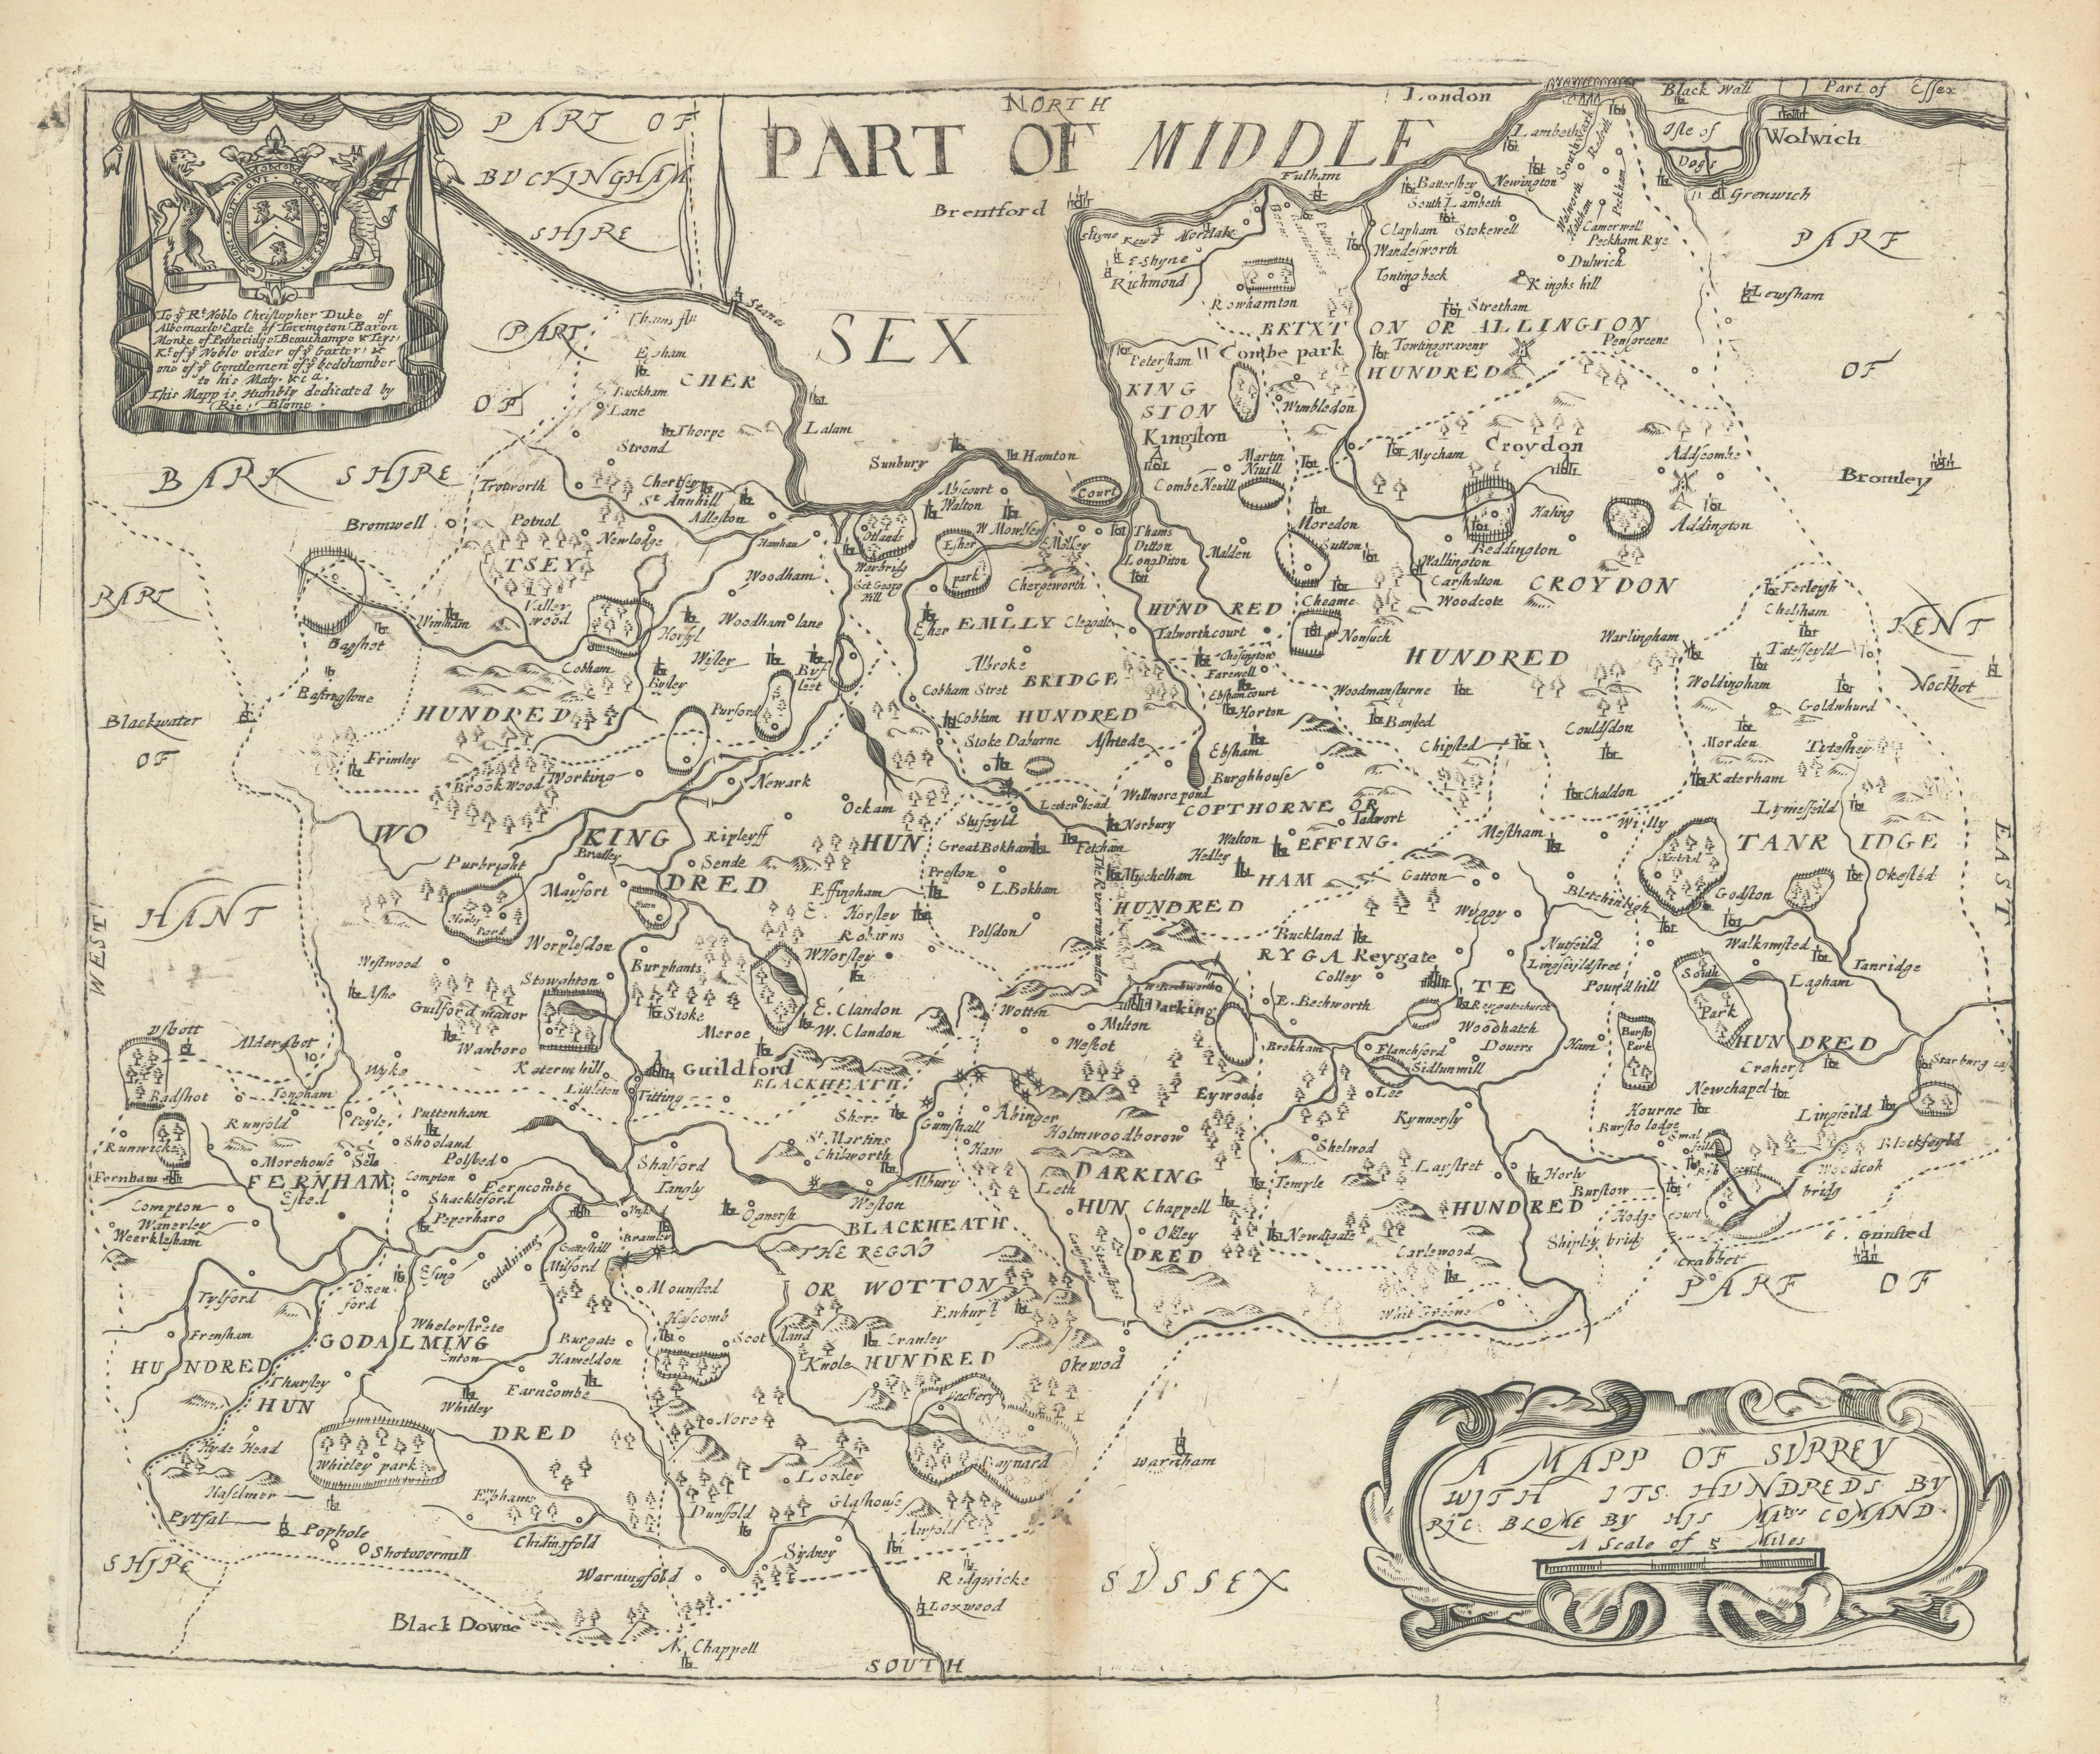 Associate Product A Mapp of Surrey with its Hundreds by Richard Blome 1673 old antique chart